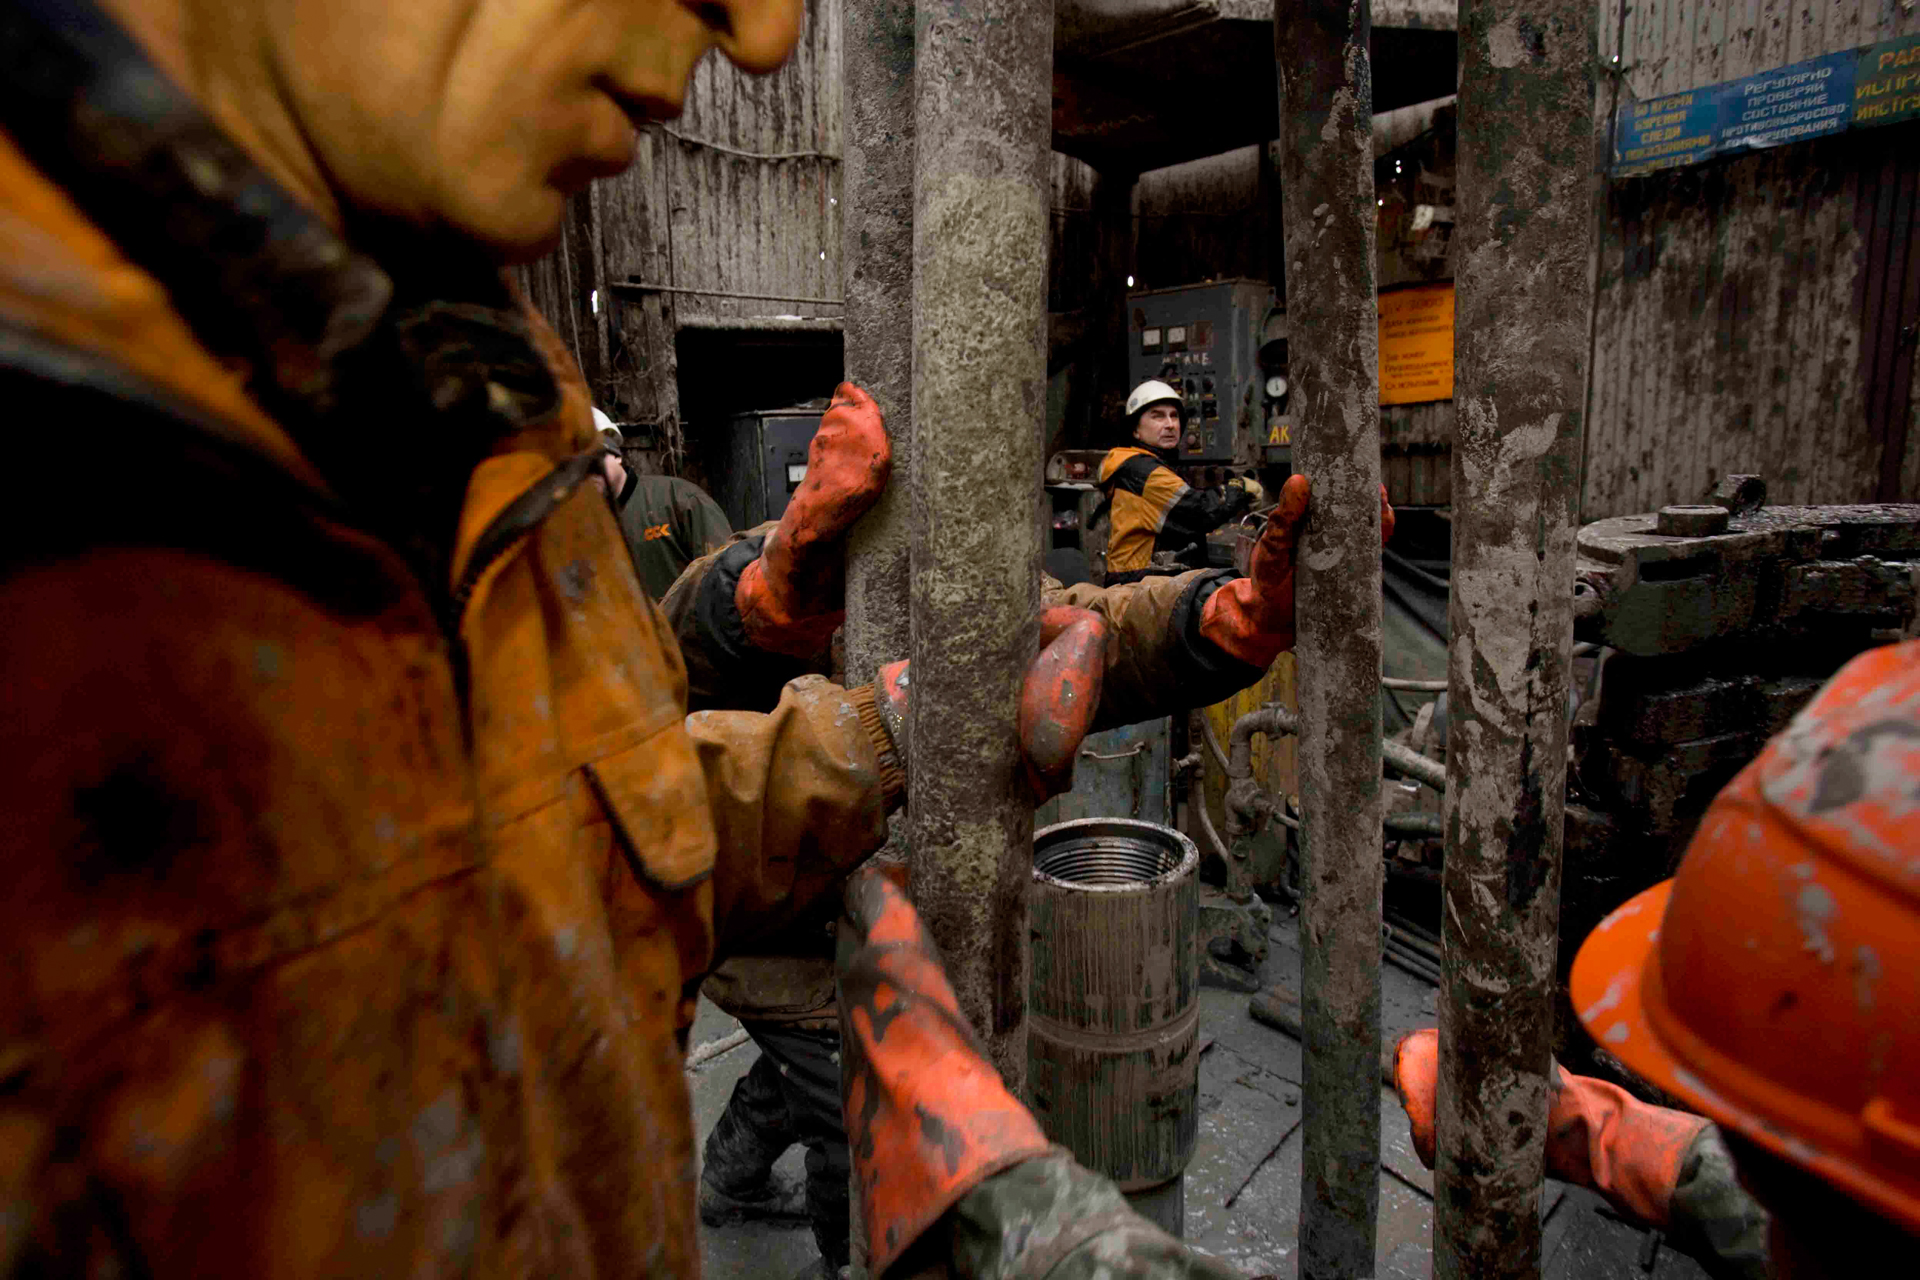  Mud-spattered and cold, oil workers change a drilling pipe. The enormous growth of Russia's oil industry has been fueled by surging world oil prices.  Yuzhno-Priobskoye, Russia  